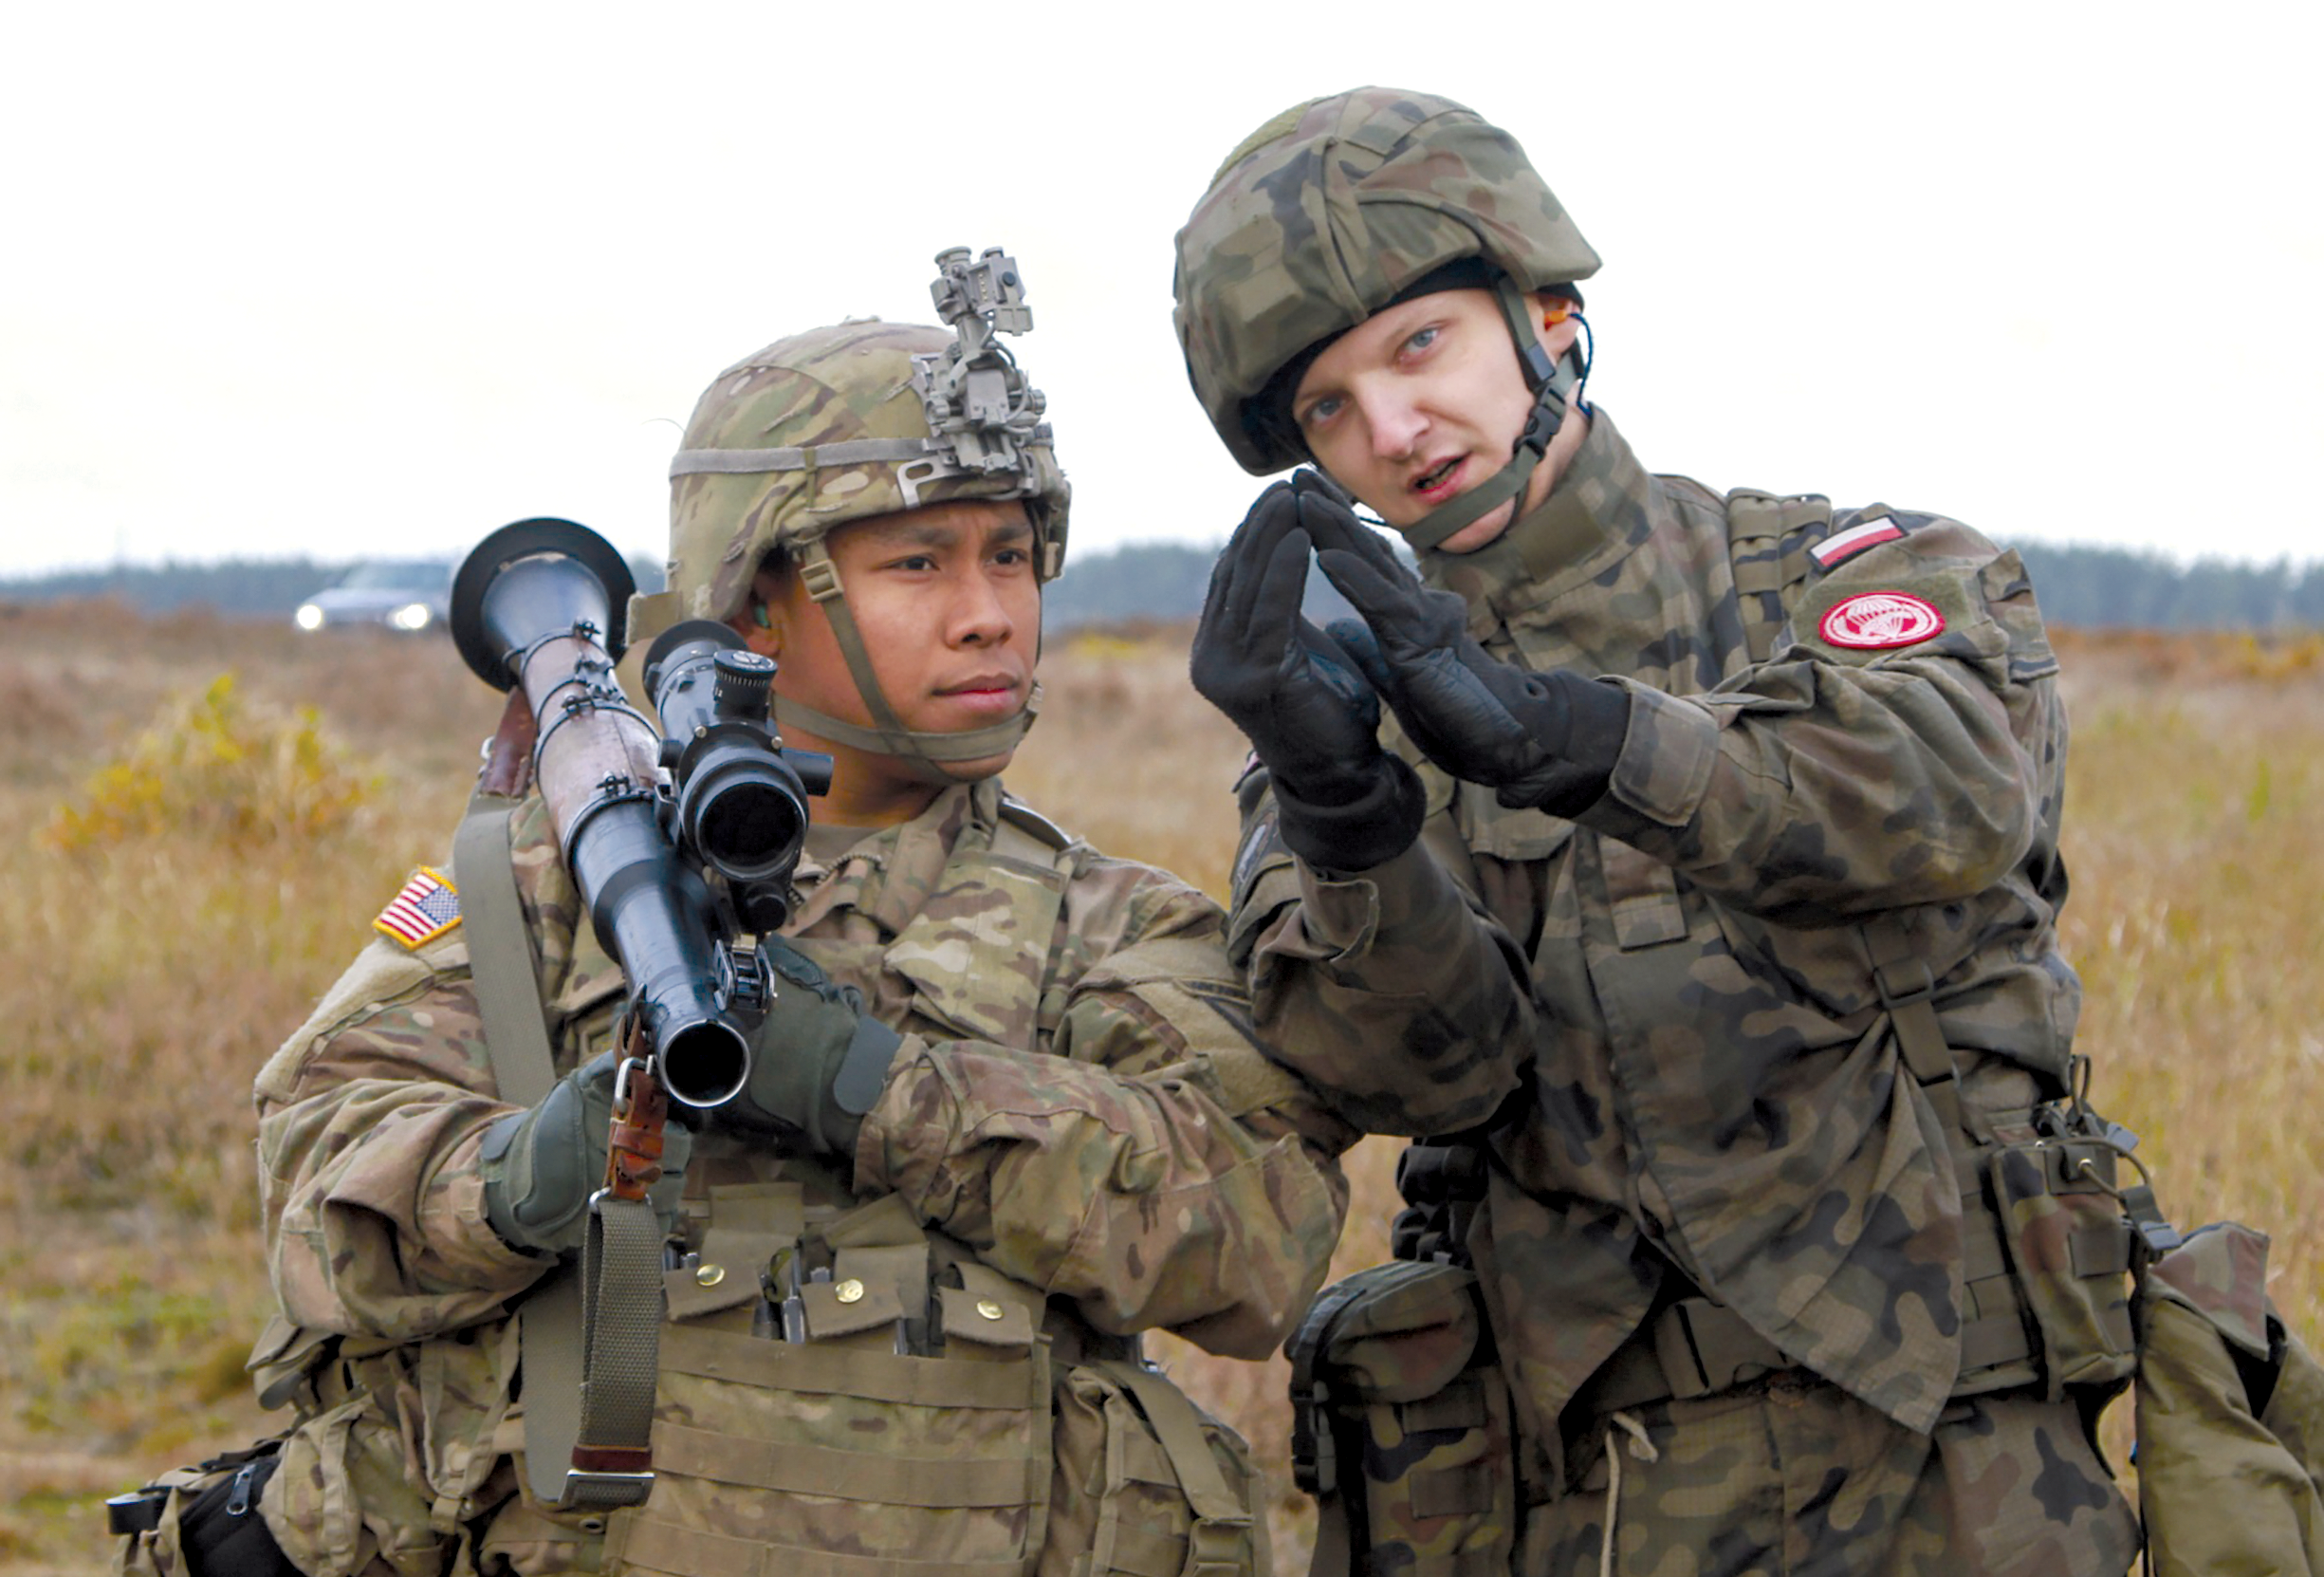 Spc. Jacob Quitugua, 2nd Battalion, 503rd Infantry Regiment, 173rd Airborne Brigade, holds an RPG-7D antitank grenade launcher while Pvt. Pawel Tylek, 16th Polish Airborne Battalion, 6th Airborne Brigade, describes the proper sight picture for the weapon 29 October 2016 during antiarmor training in Studnica, Poland. The U.S. soldiers were in Poland on a training rotation in support of Operation Atlantic Resolve, a U.S.-led effort in eastern Europe that demonstrates U.S. commitment to the collective security of NATO and dedication to enduring peace and stability in the region.  (Photo by Sgt. Lauren Harrah, U.S. Army)